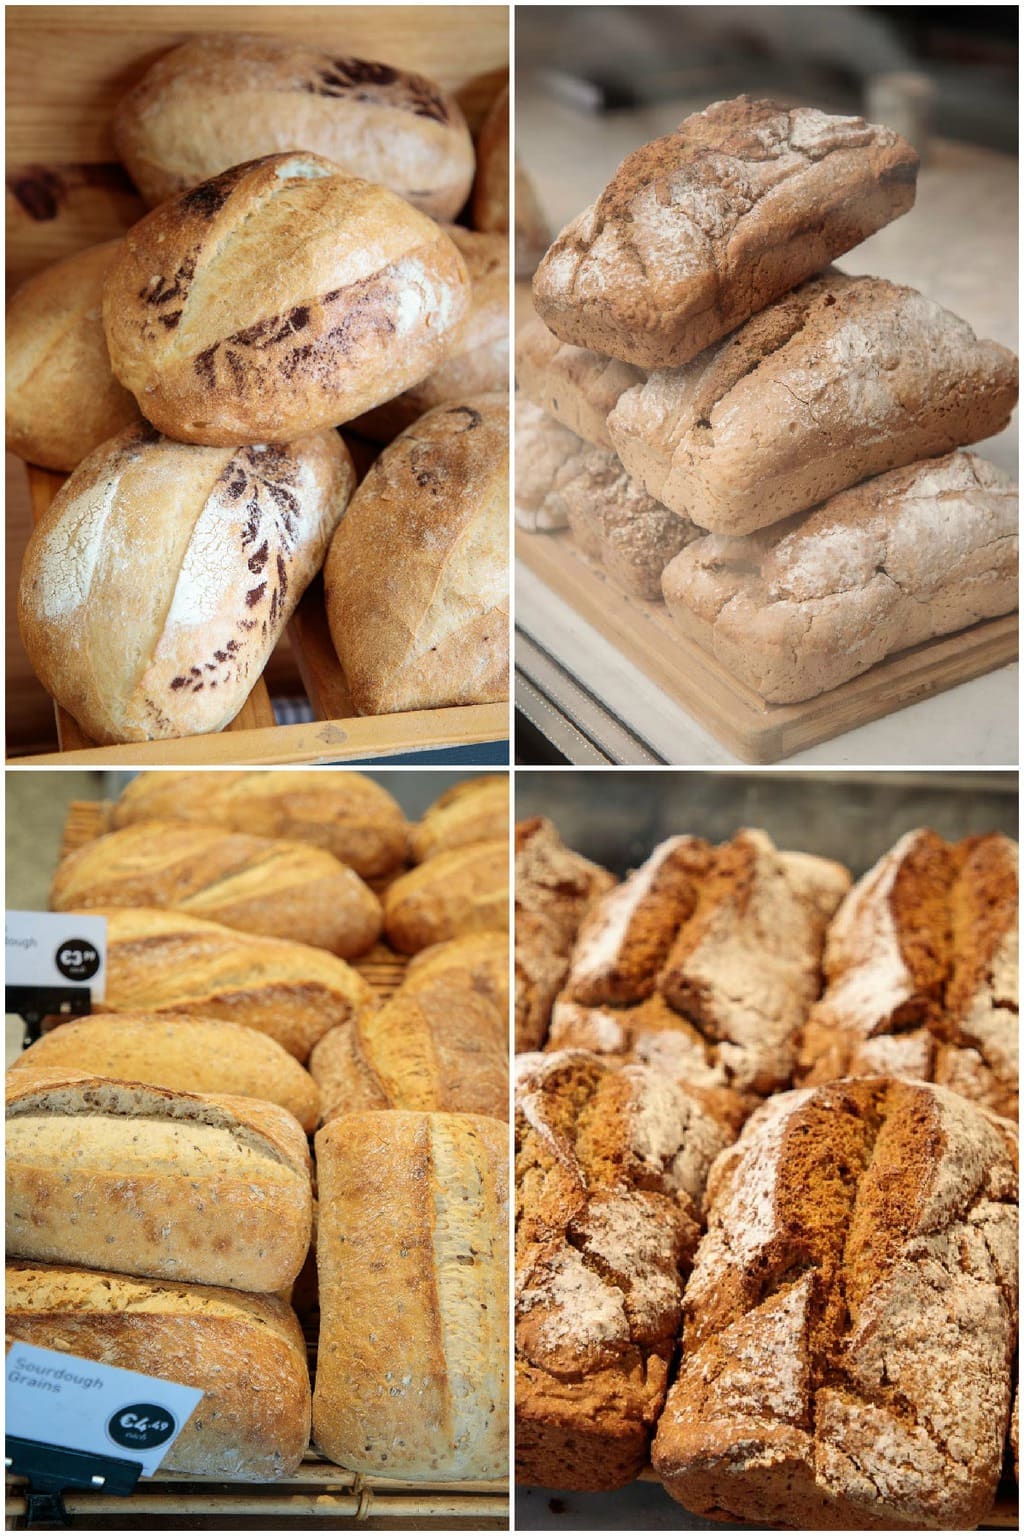 Phot of different types of Irish breads from a traditional Irish bakery.